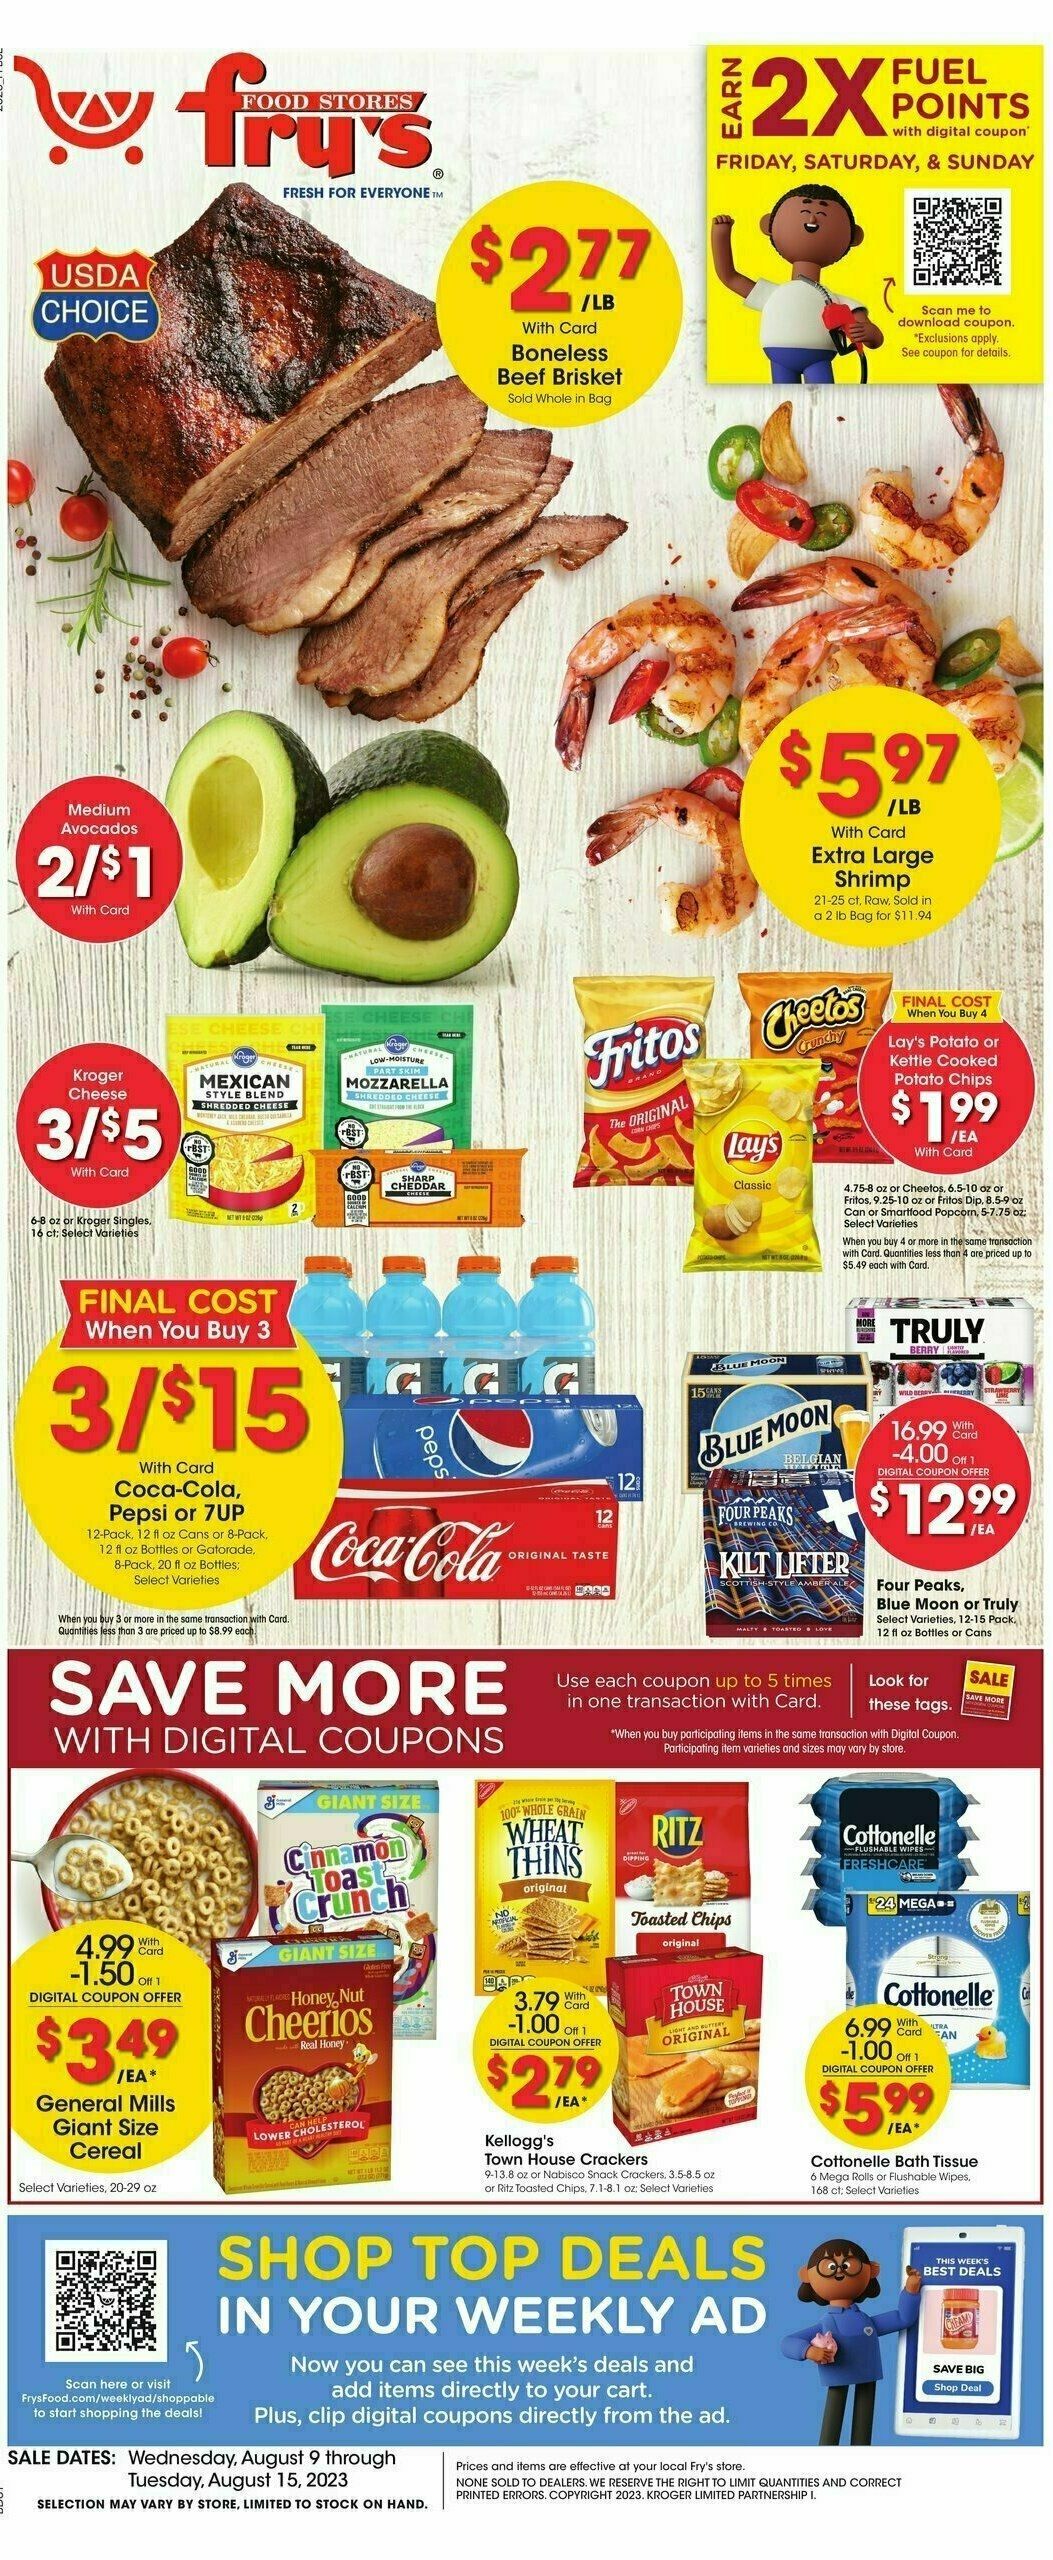 Fry's Food Weekly Ad from August 9